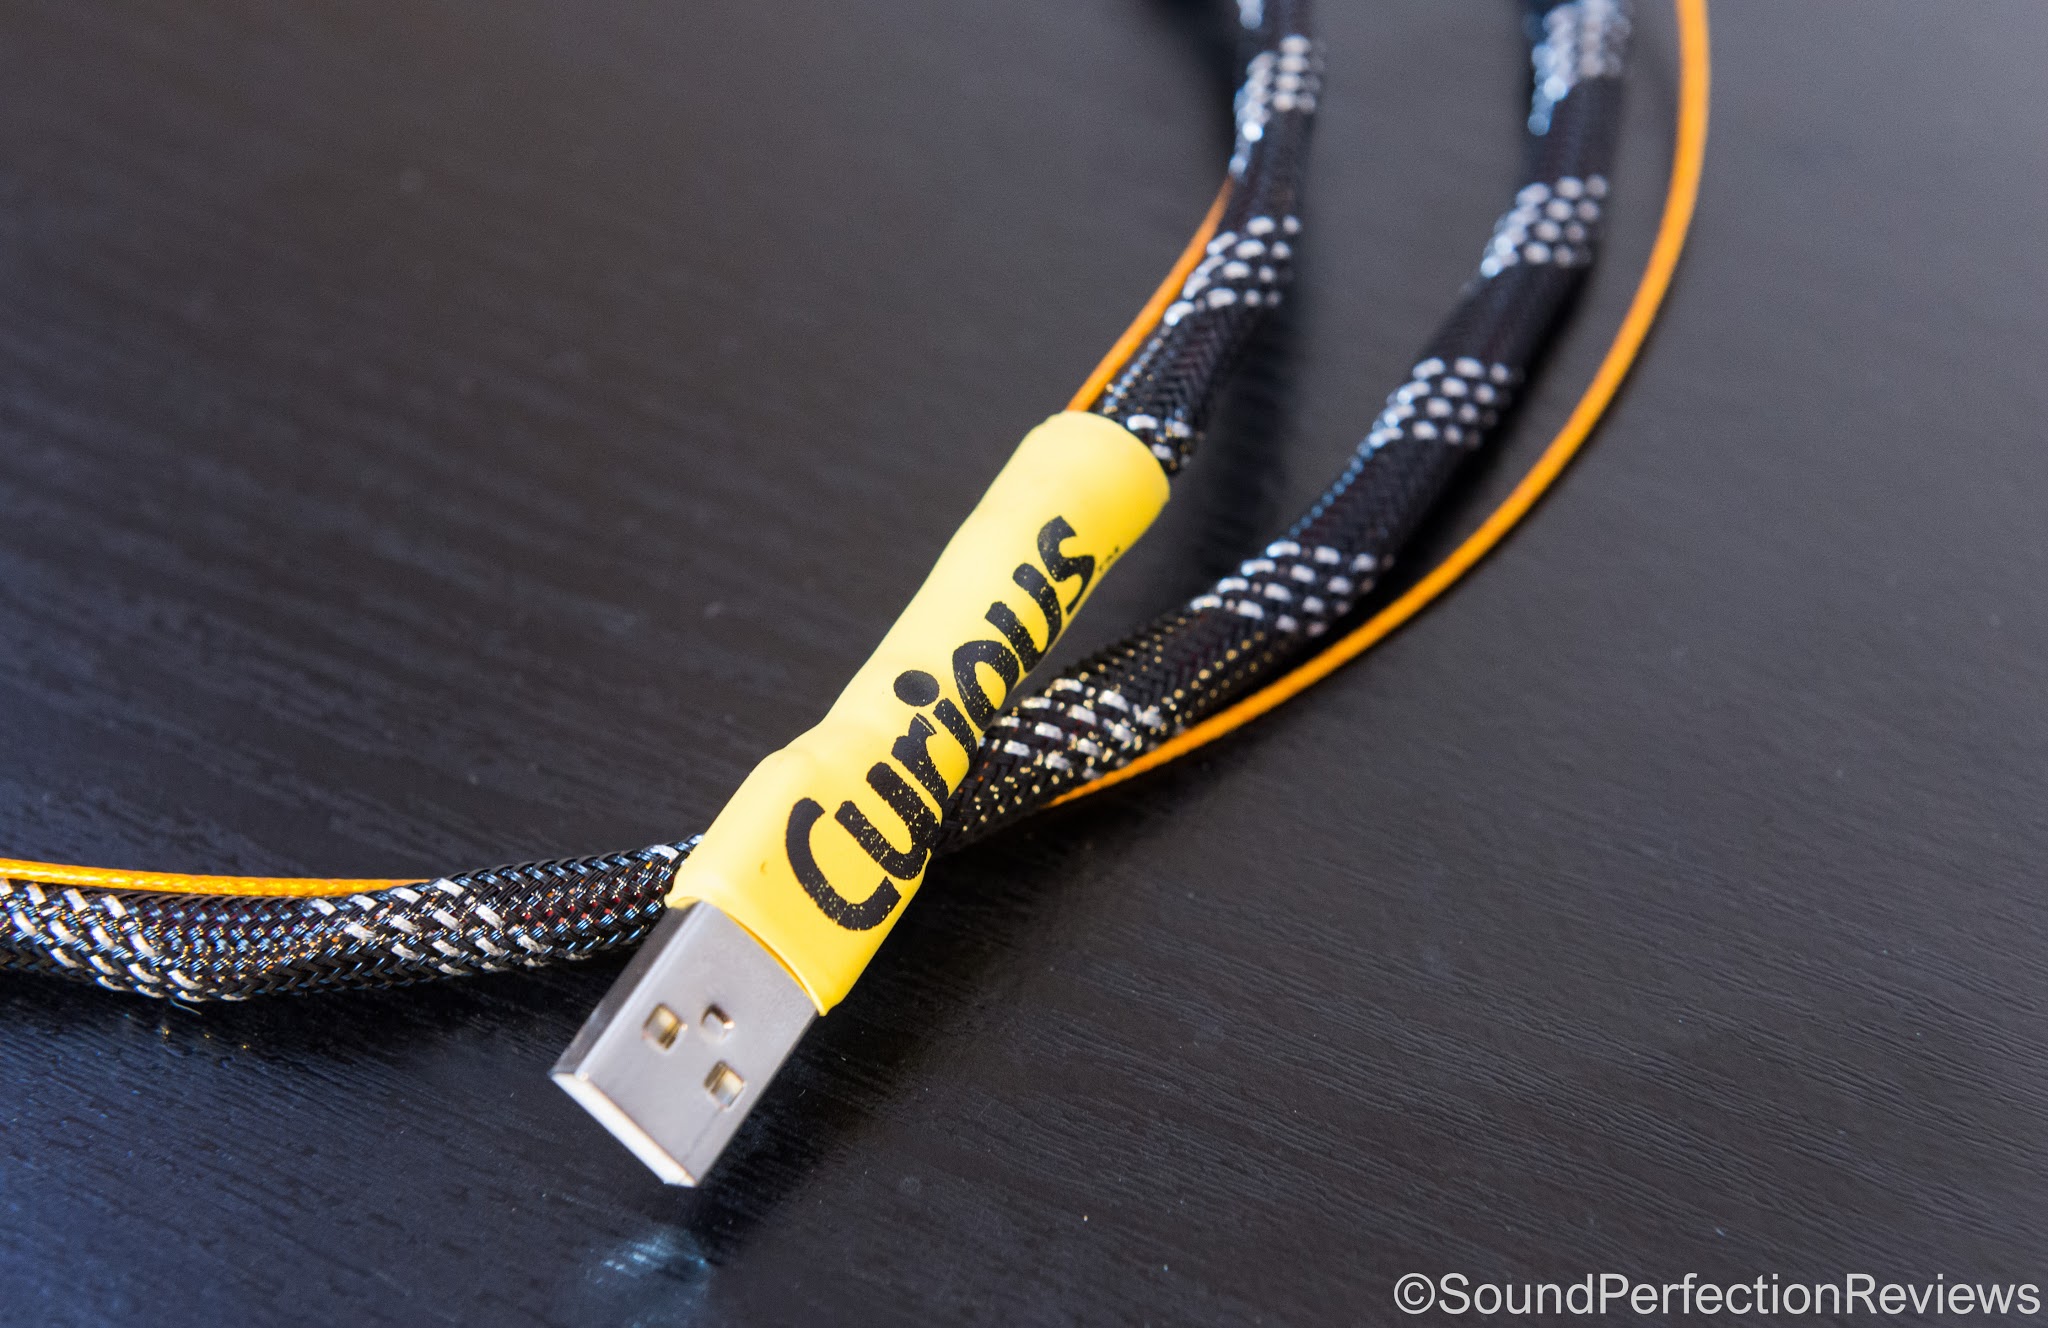 Review: Curious Cables USB Cable